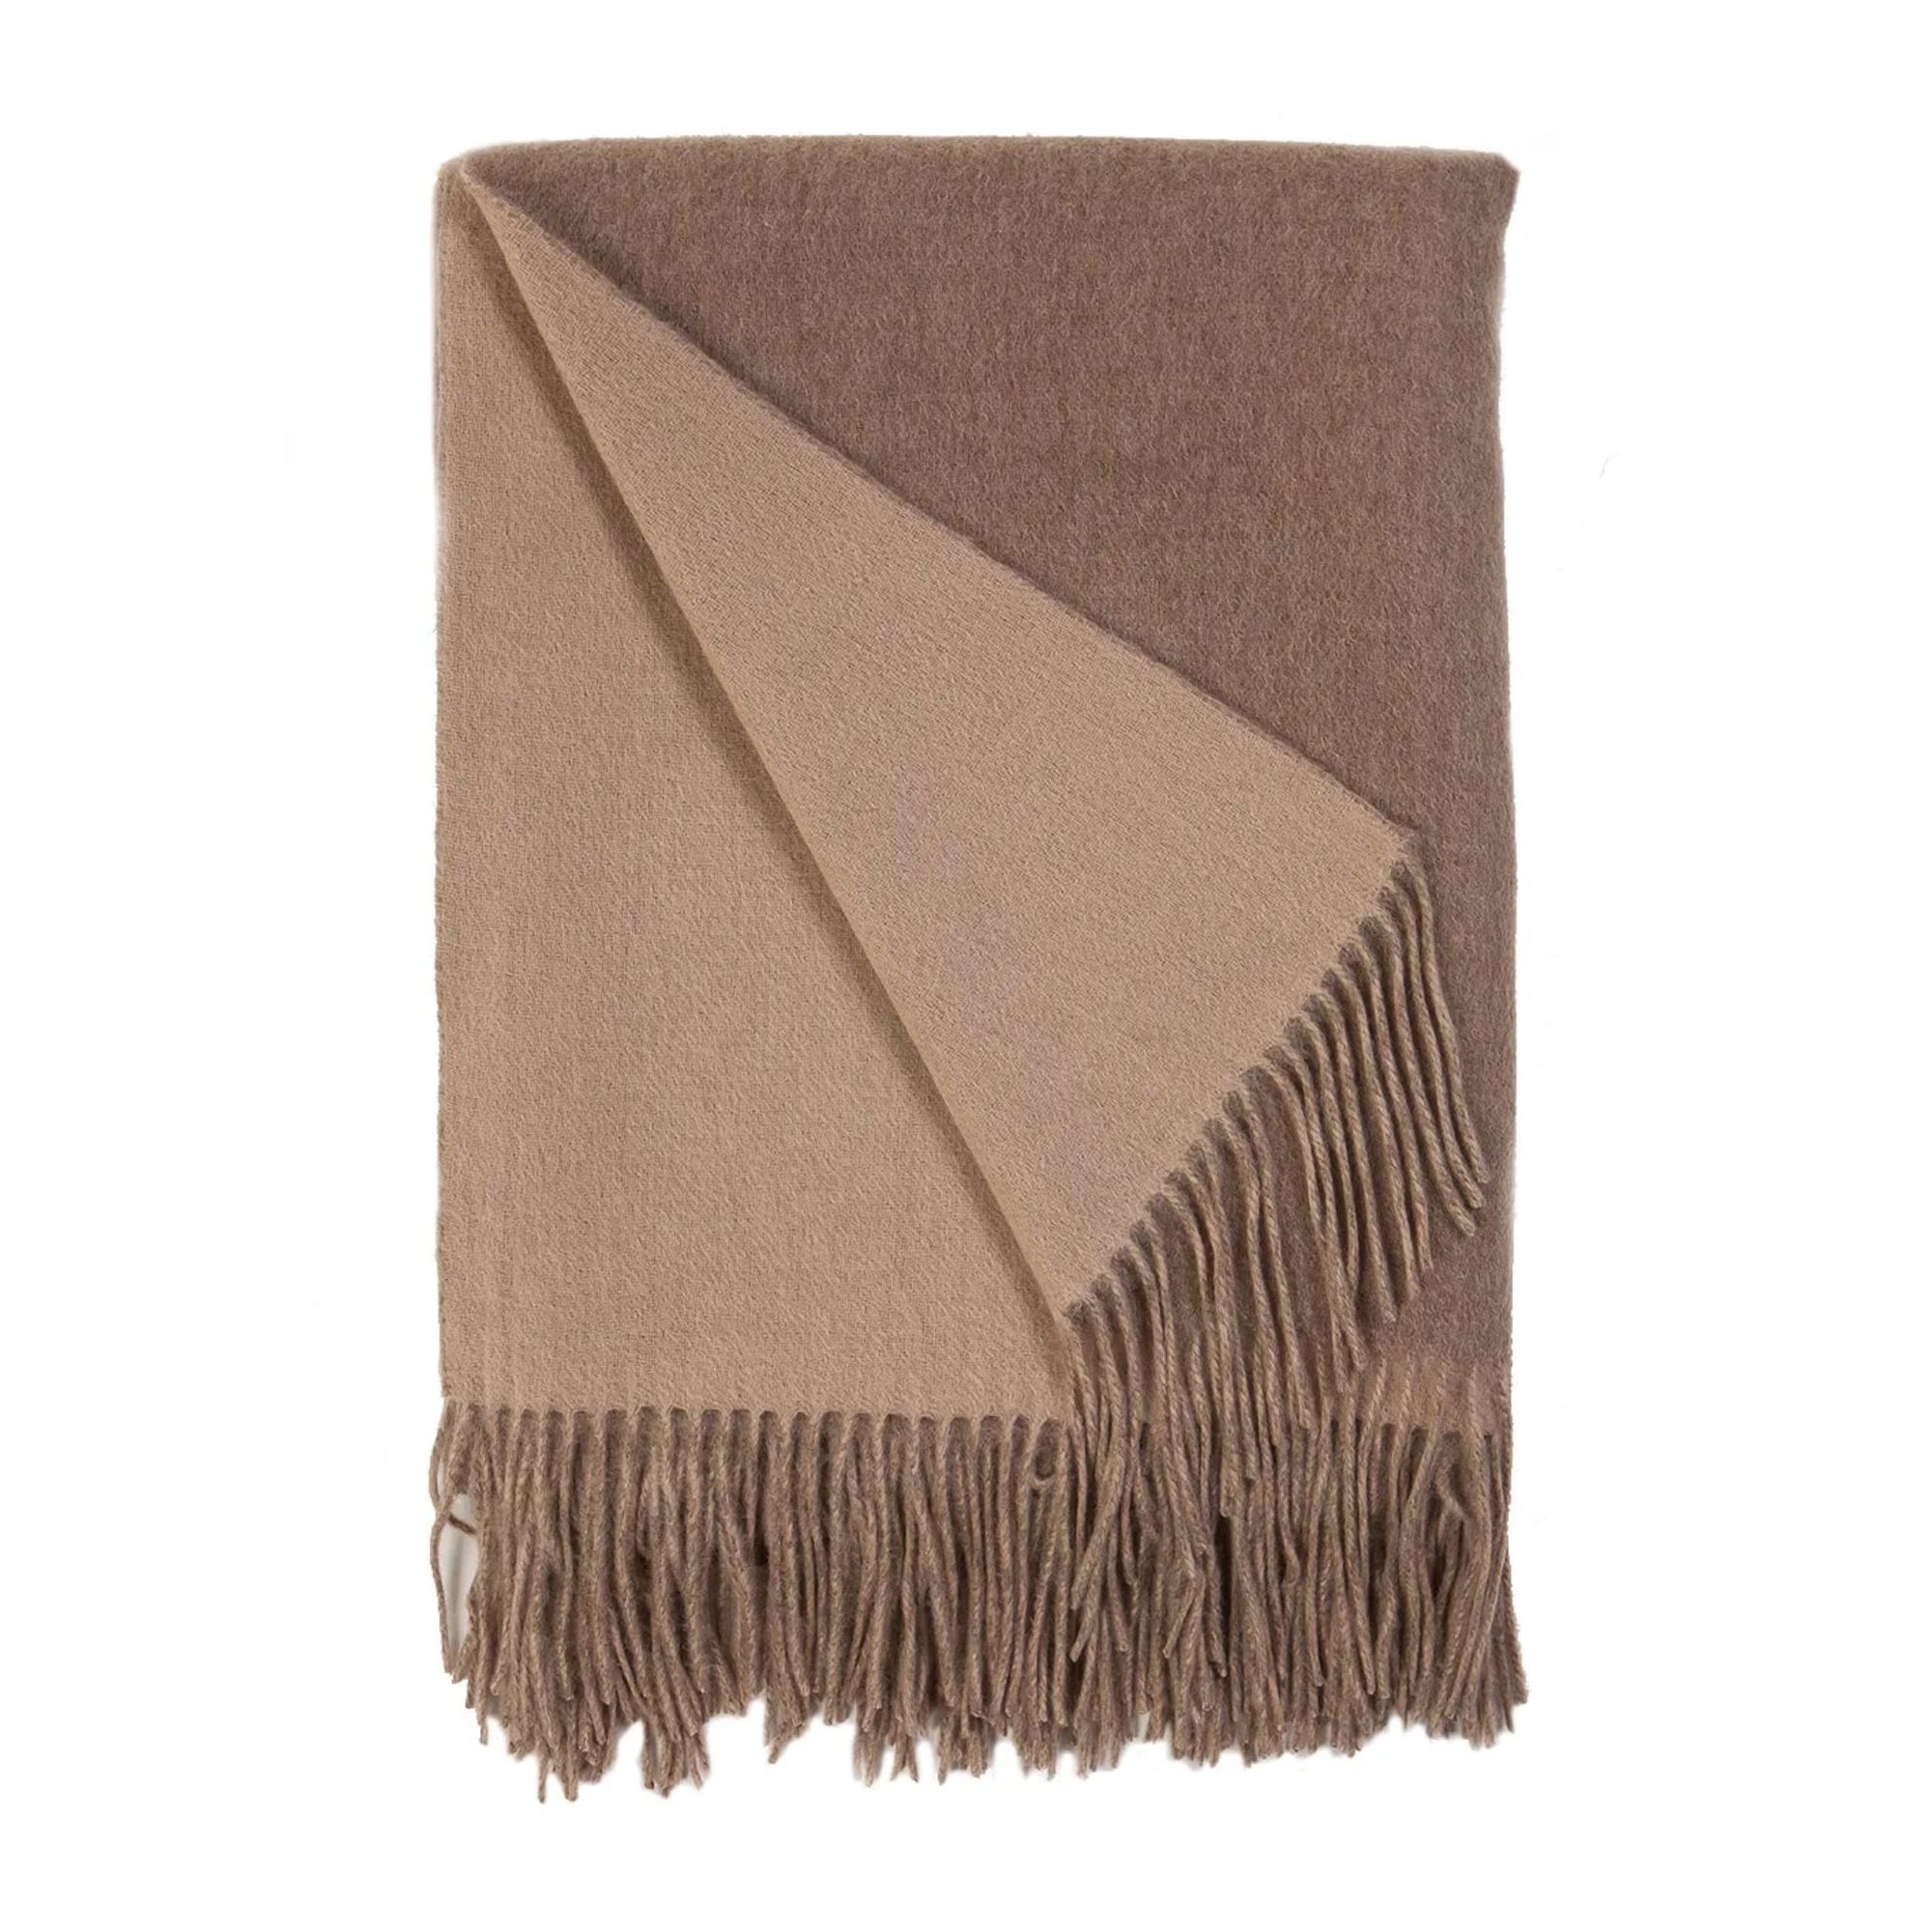 Silo of Alashan Double Faced Classic Cashmere Blend Throw - Mushroom/Bisque color